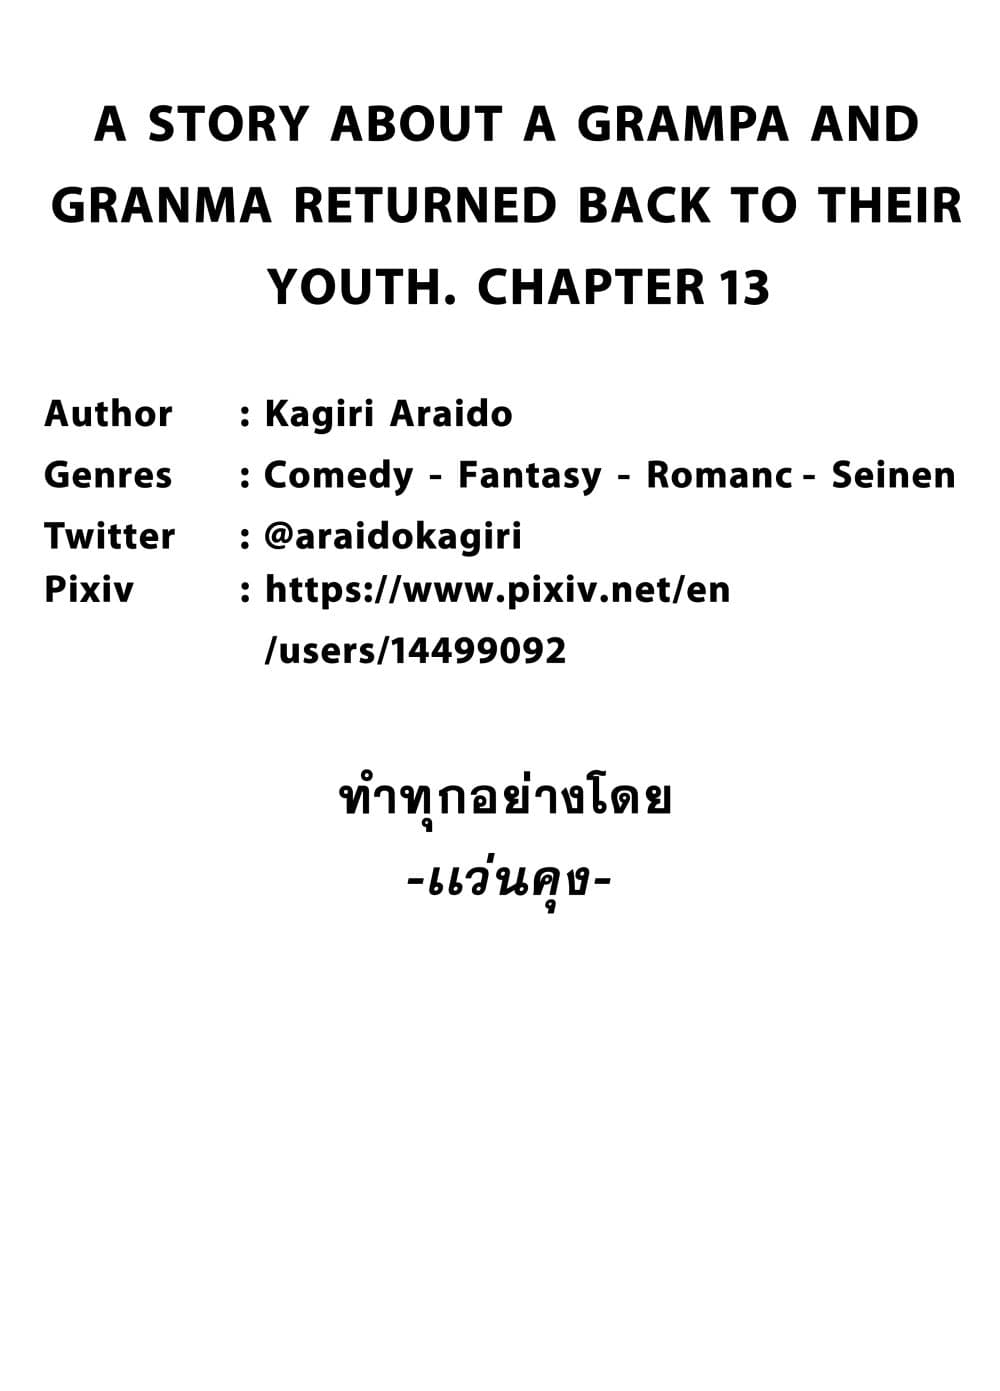 A Story About A Grampa and Granma Returned Back to their Youth 13-13